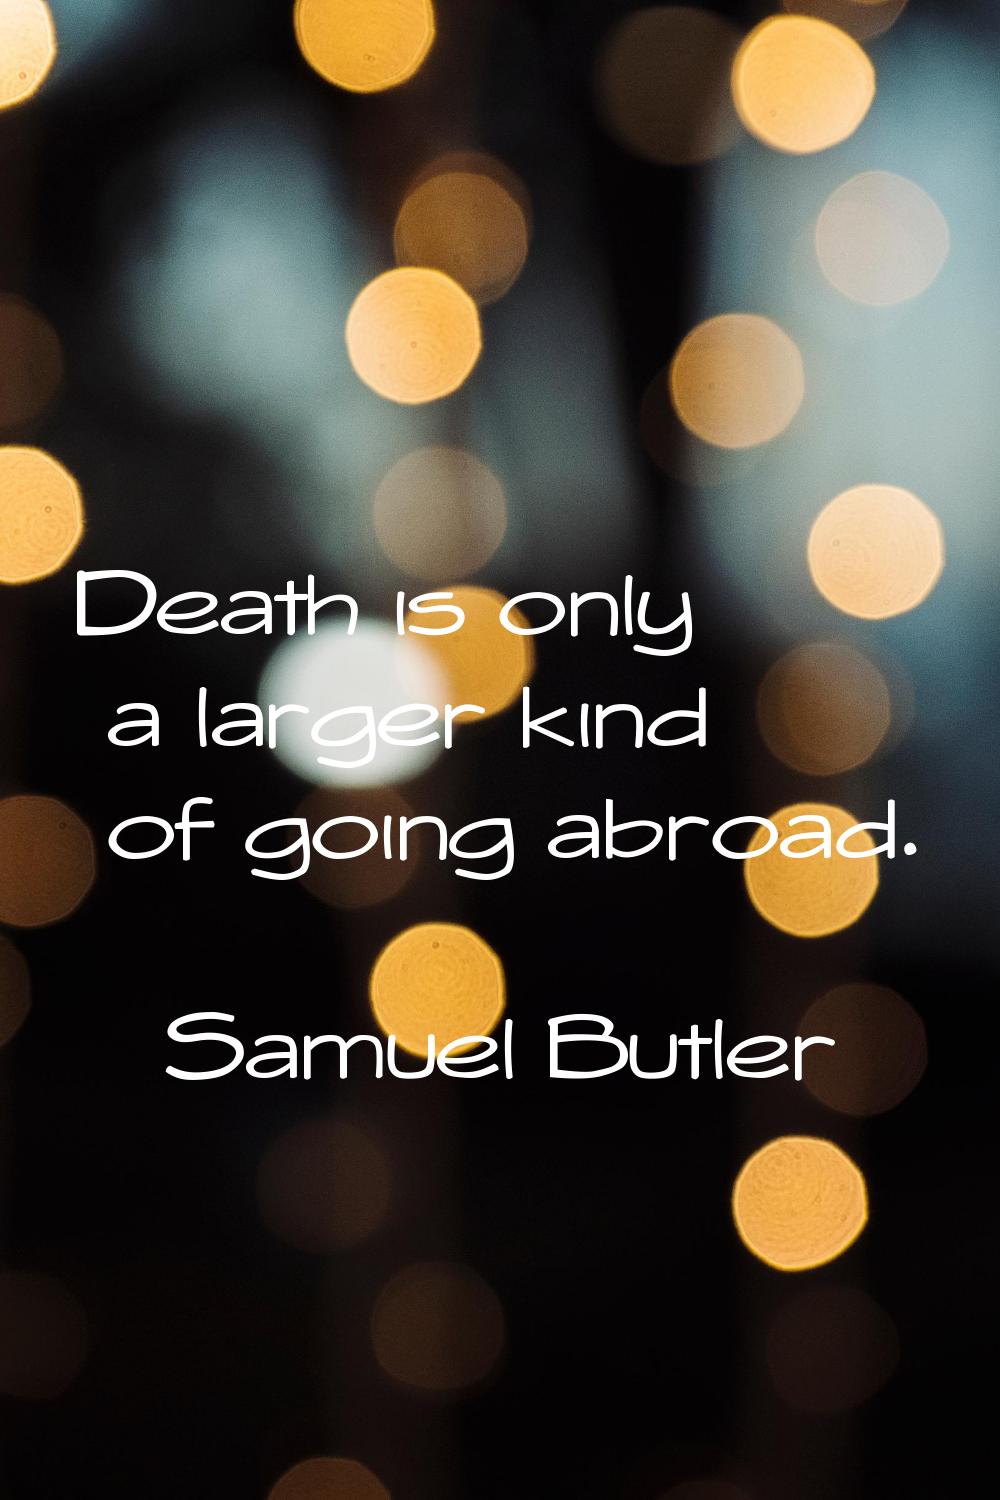 Death is only a larger kind of going abroad.